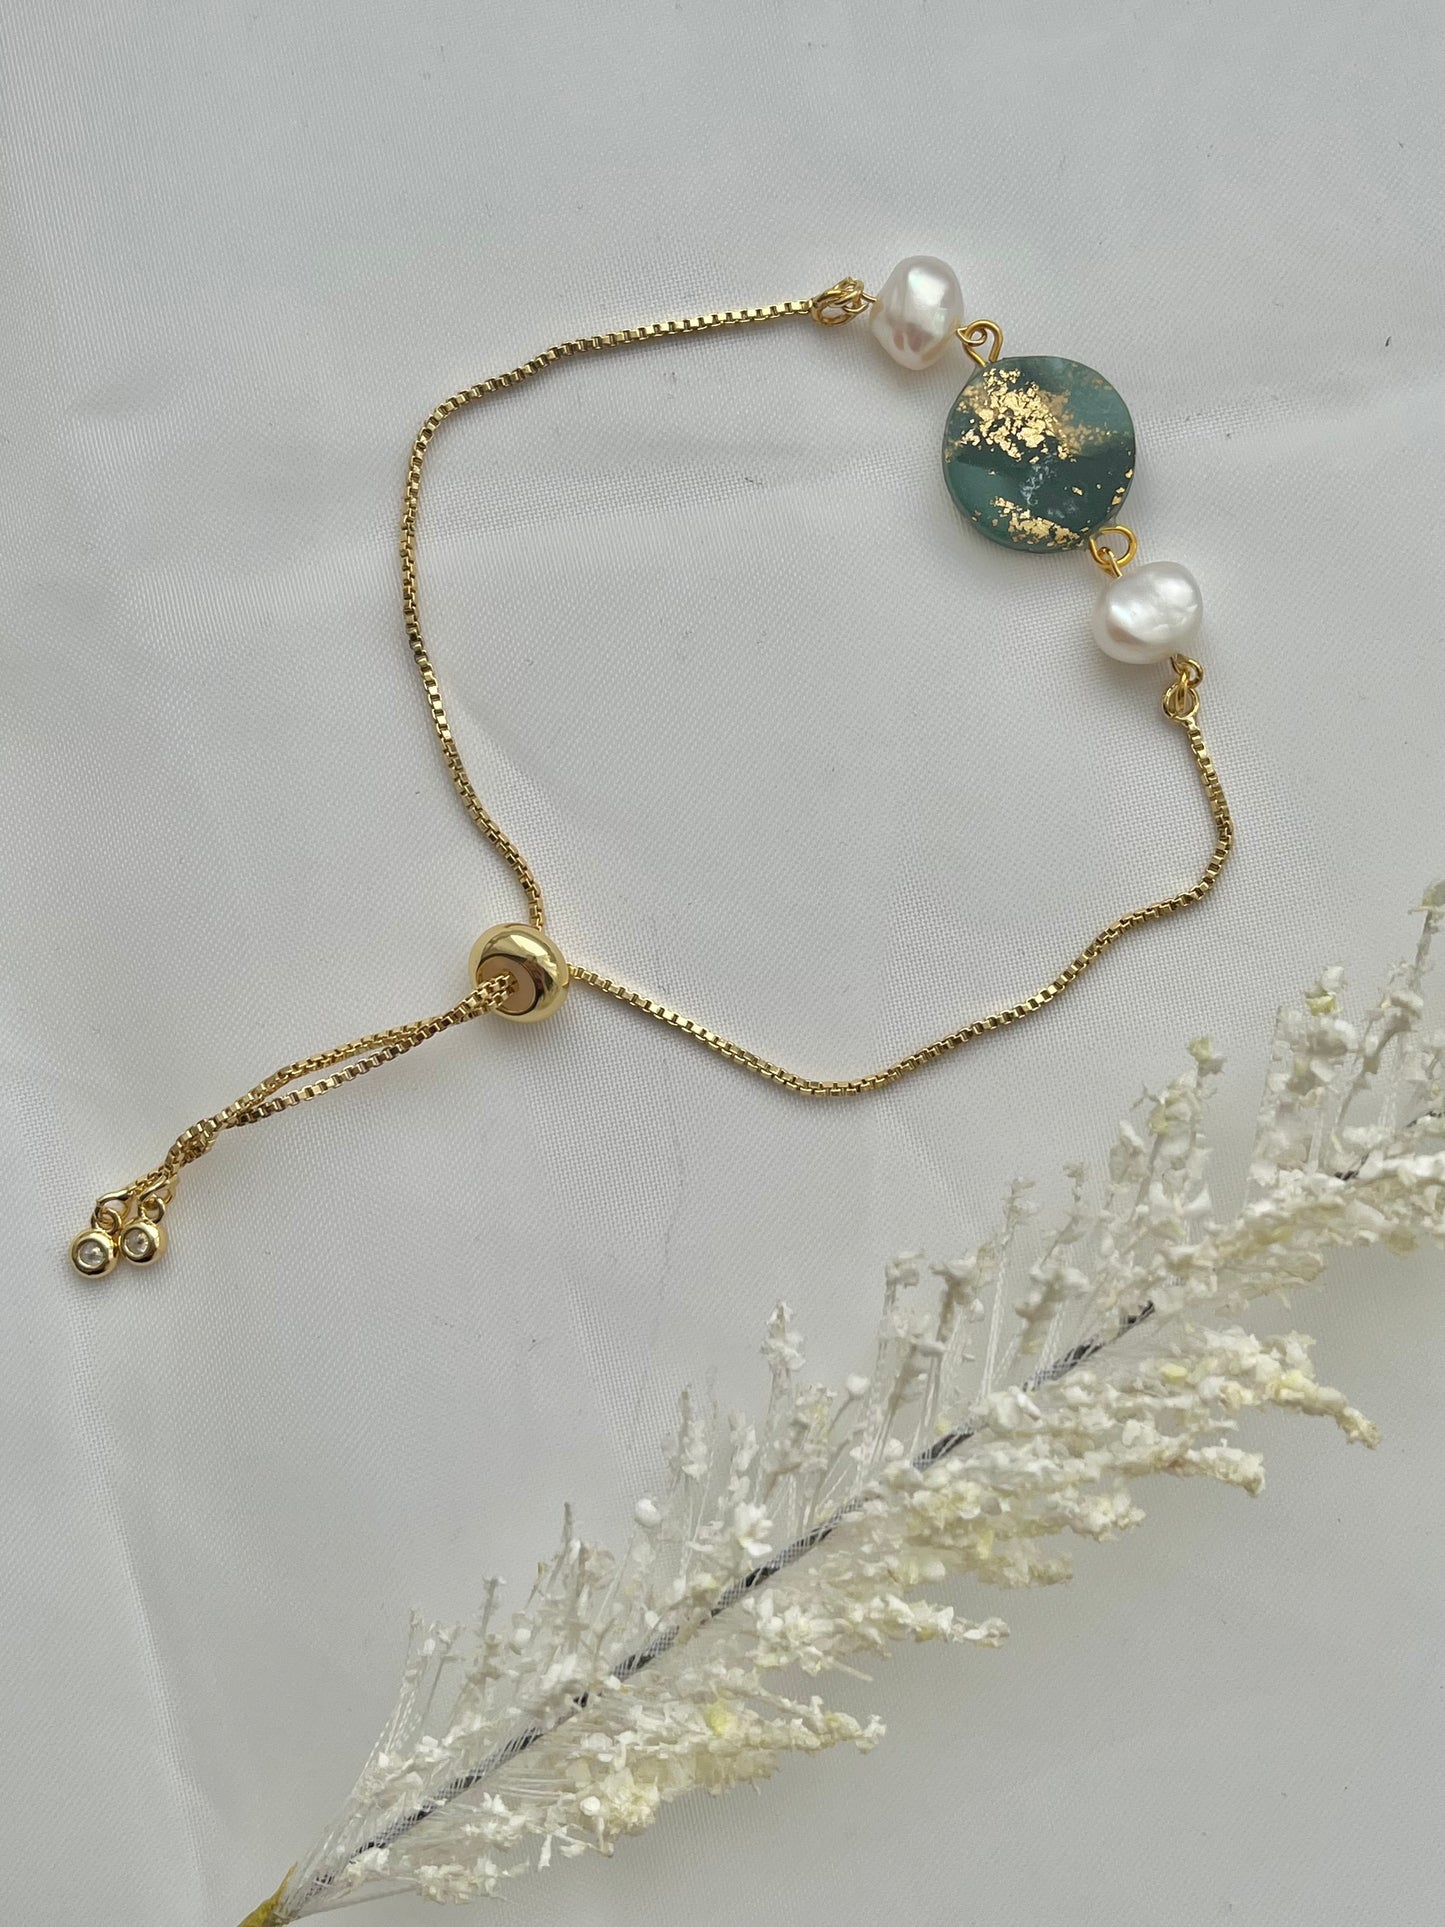 A bracelet with a dark green clay circle with freshwater pearls on either side laid flat down to show the adjustable slider